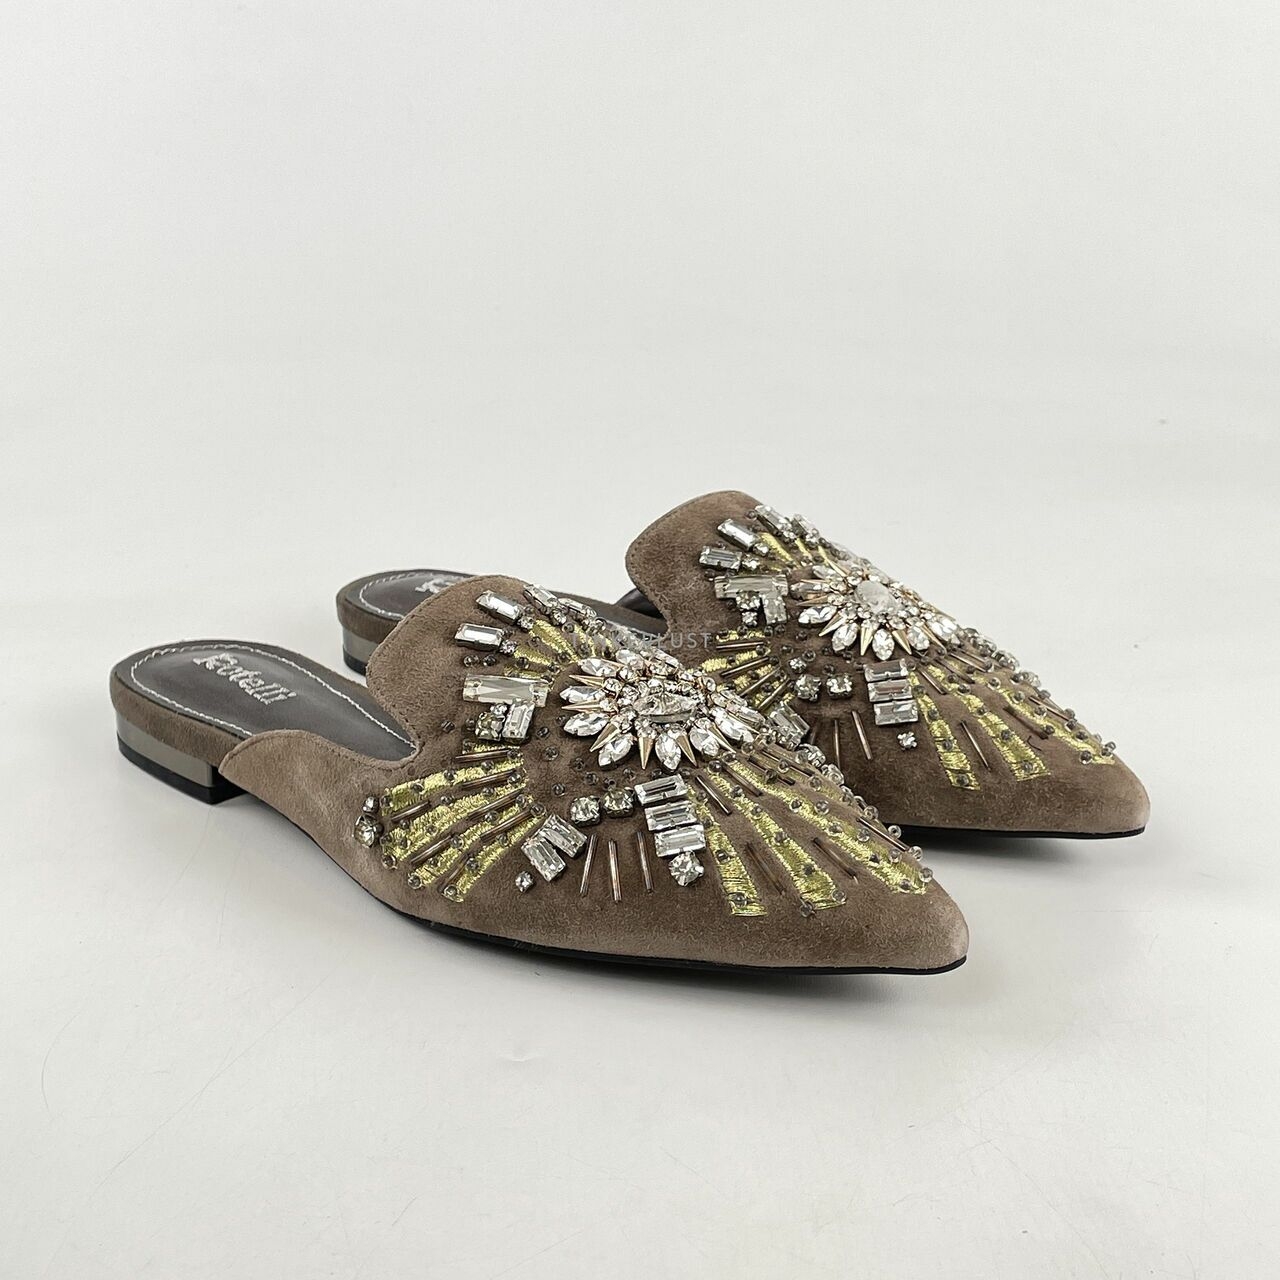 Rotelli Taupe Sandals Mules